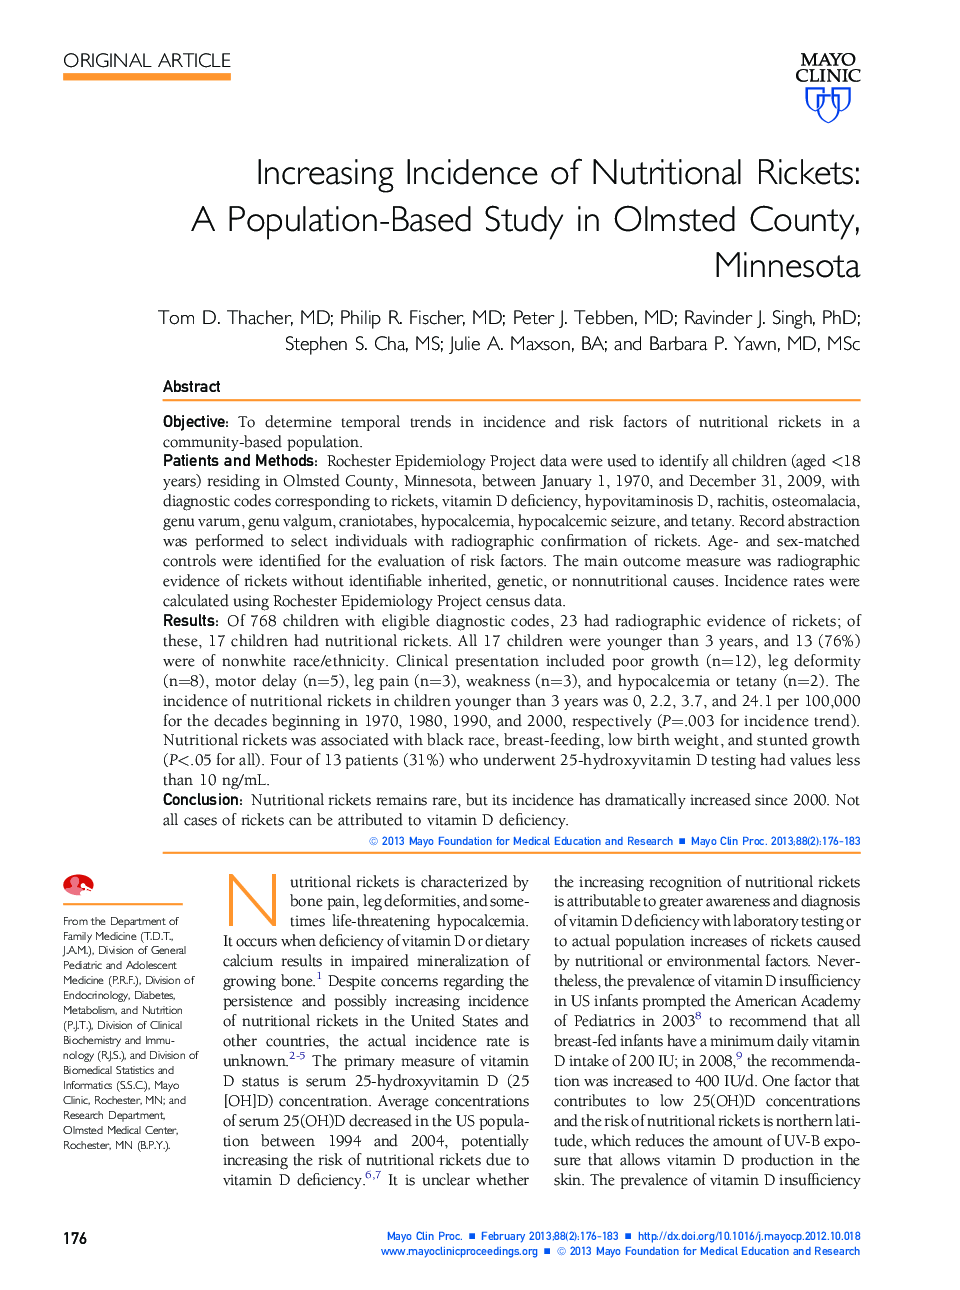 Increasing Incidence of Nutritional Rickets: A Population-Based Study in Olmsted County, Minnesota